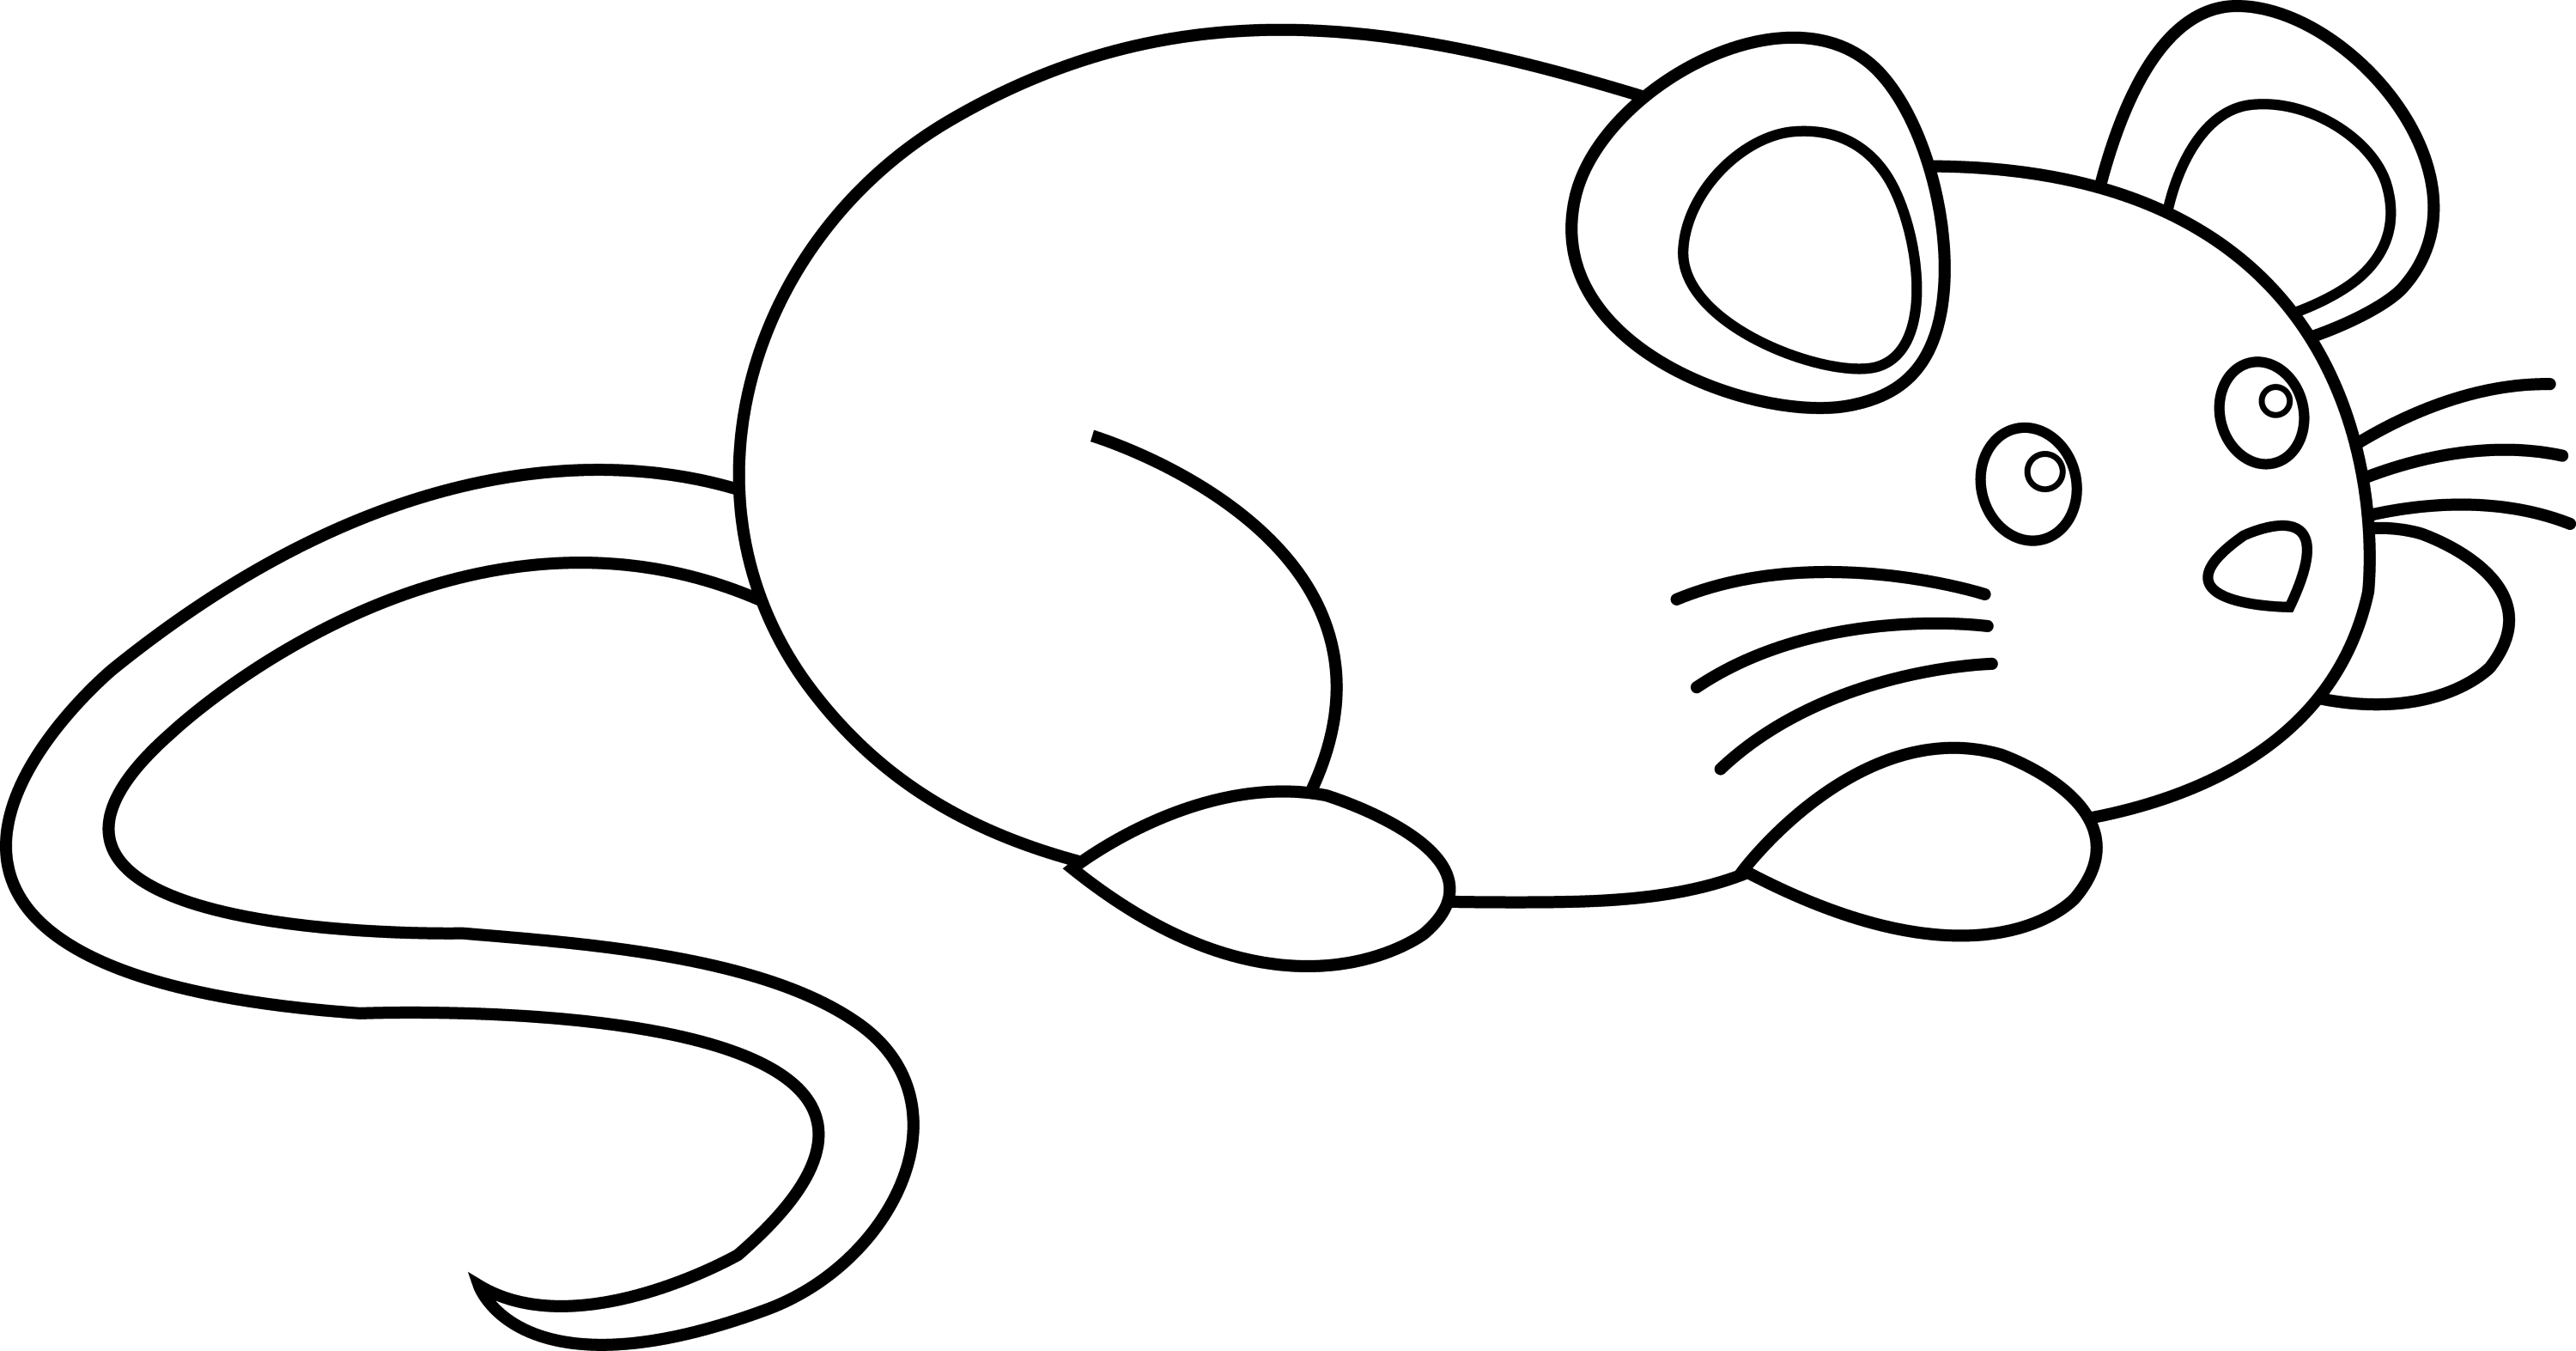 mouse drawing clip art - photo #11